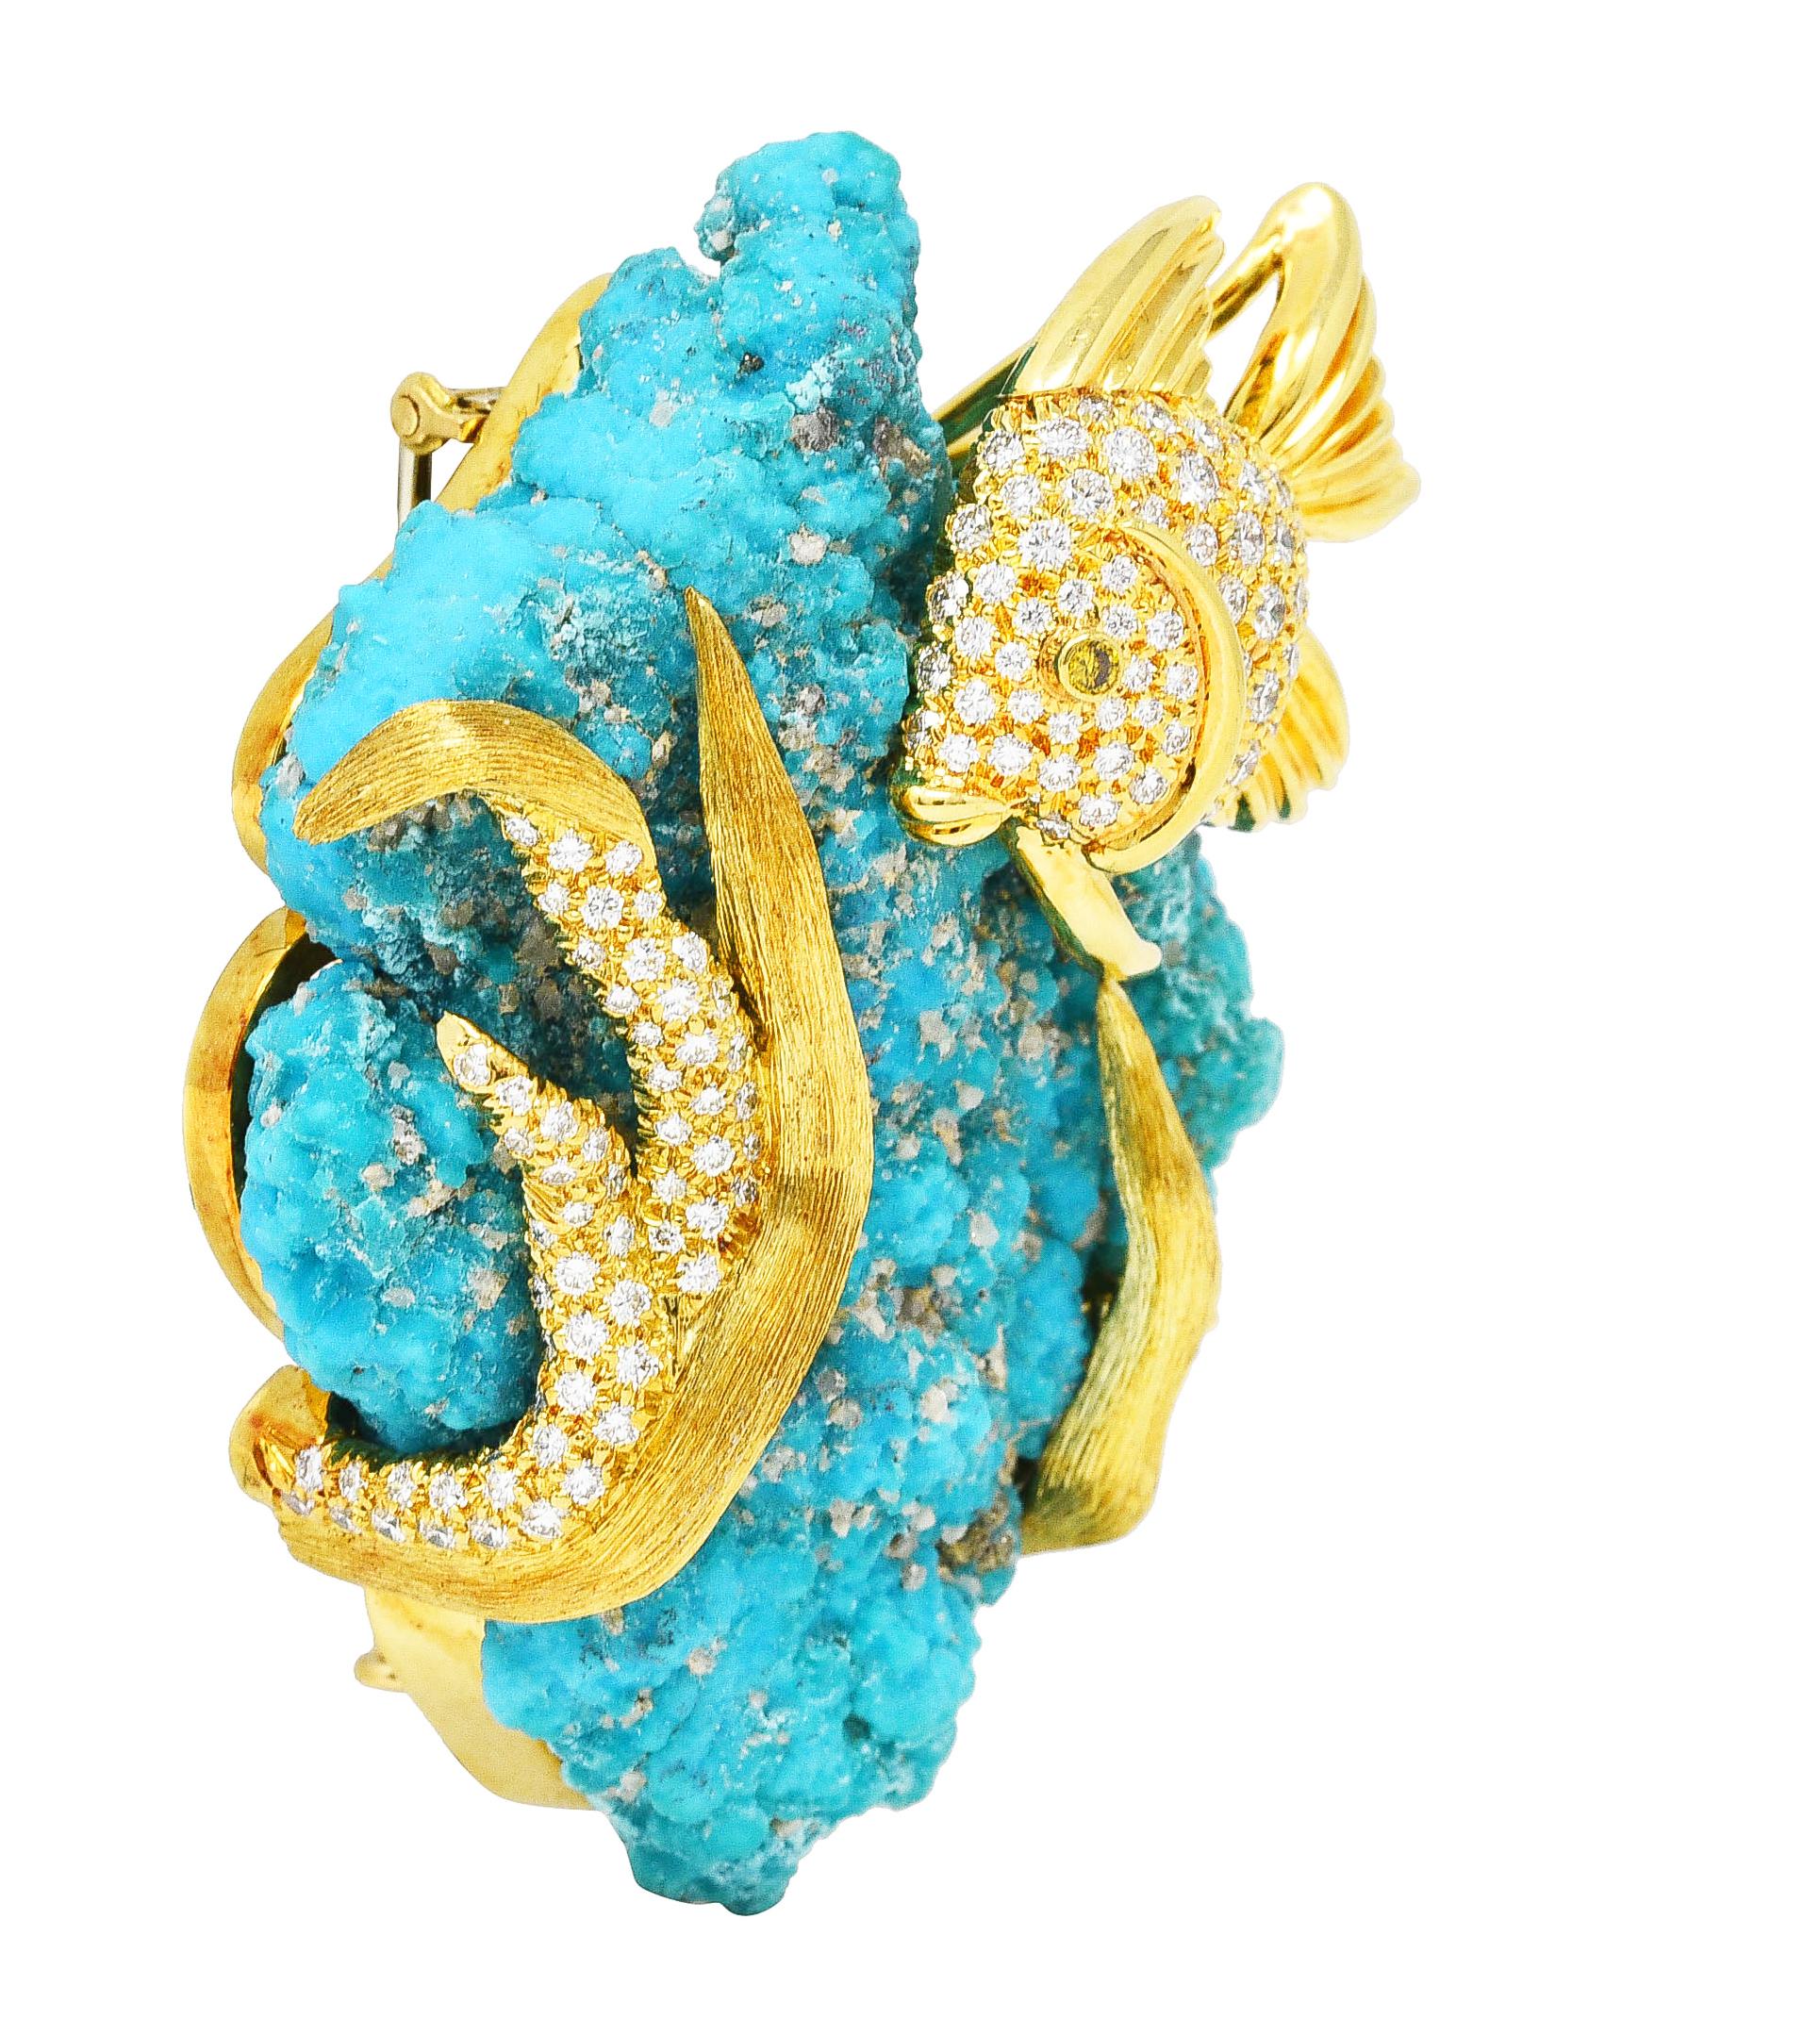 Substantial brooch features turquoise aggregate wrapped in gold seaweed tendrils and a fish. Turquoise is opaque greenish blue with mineral crystal inclusions throughout including golden pyrite. Accented by a triad of round brilliant cut diamonds